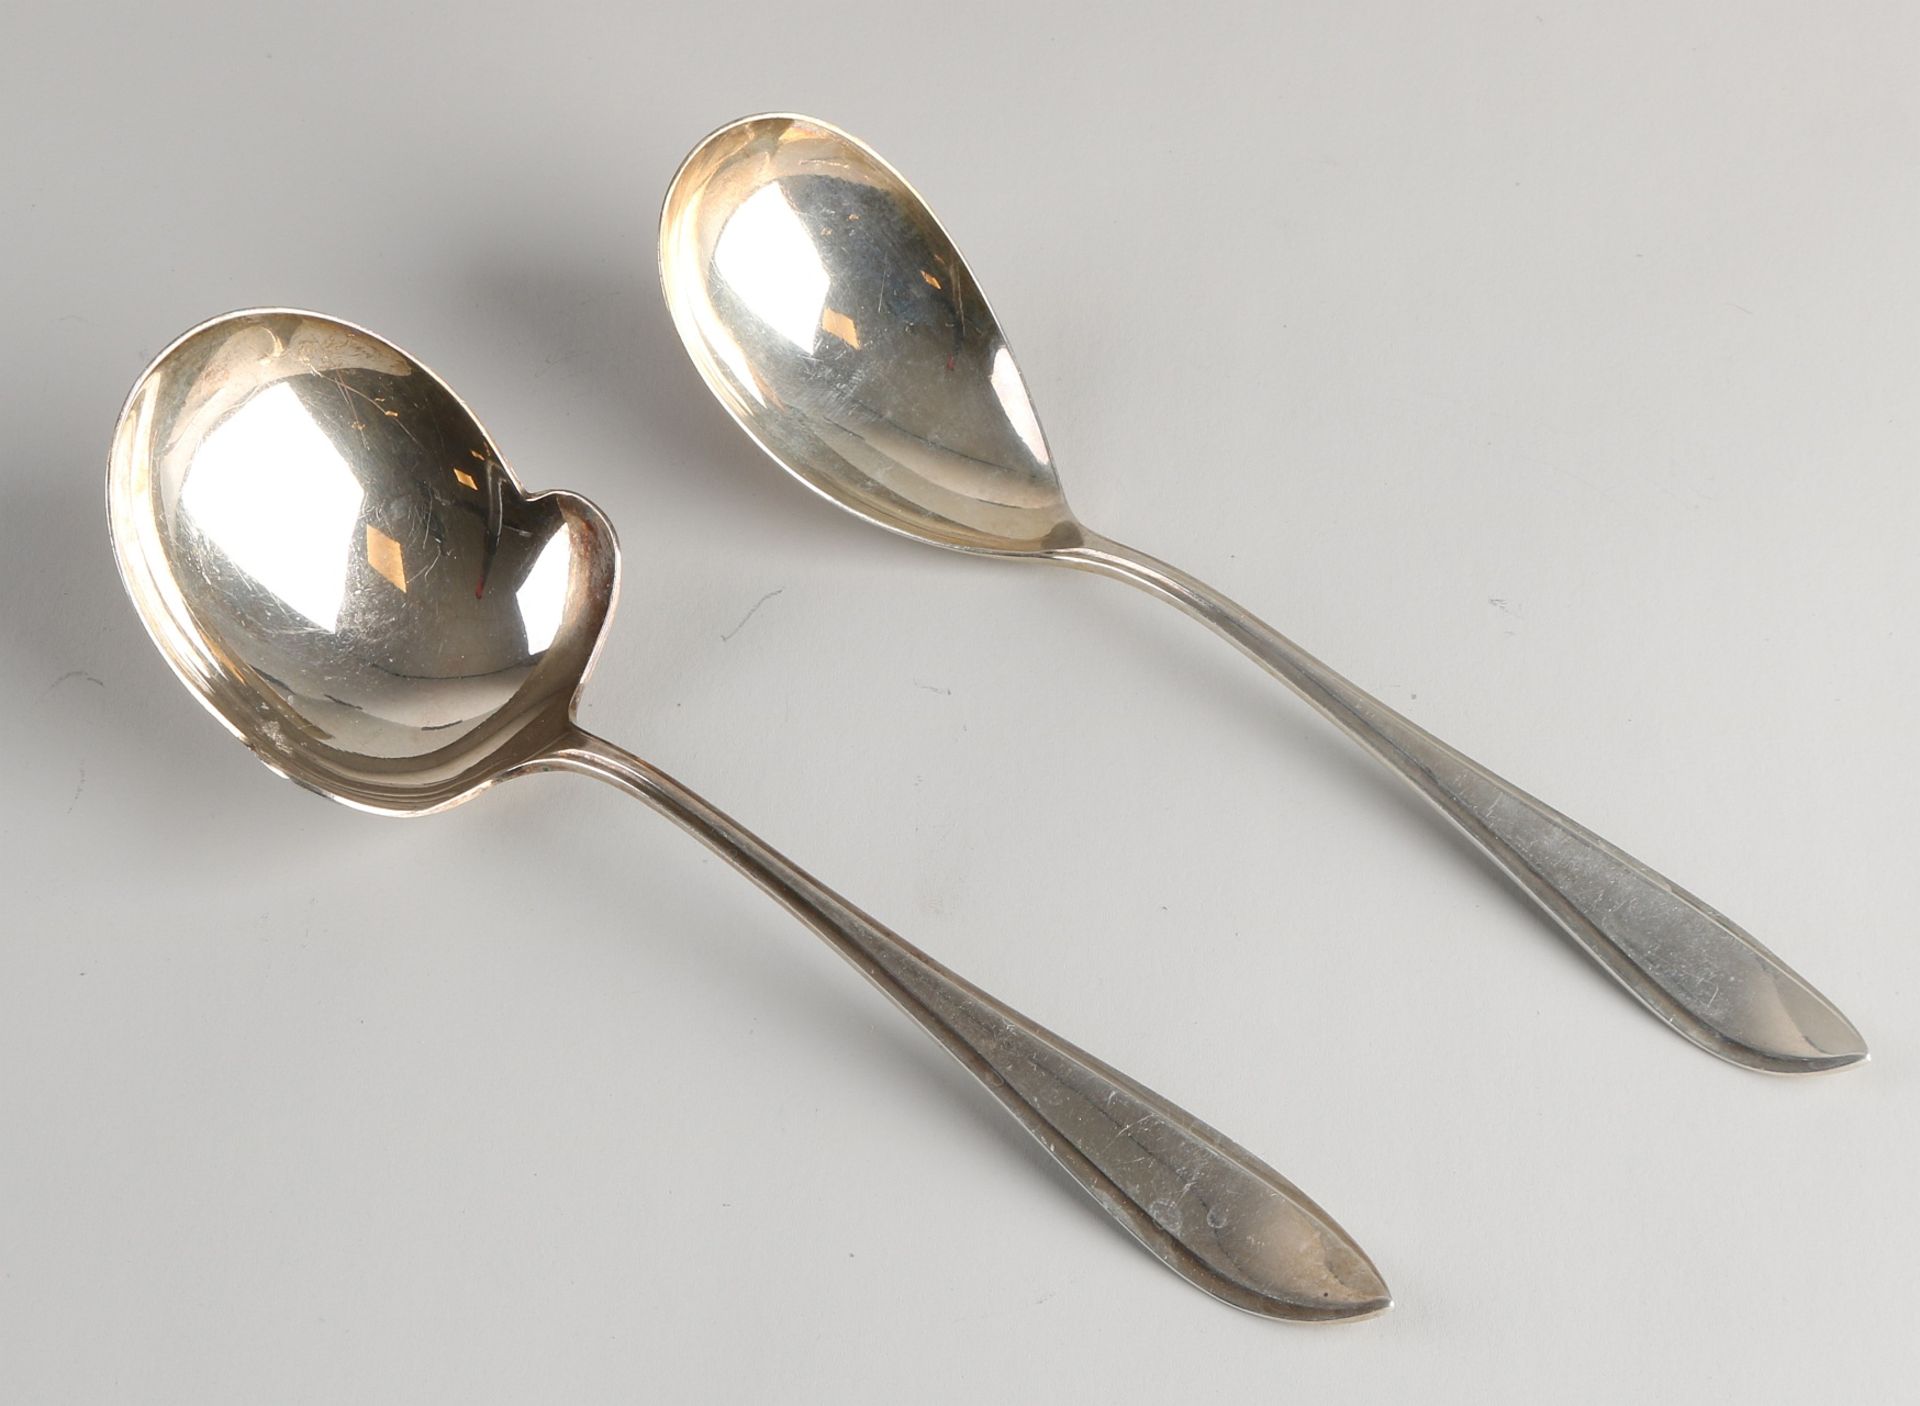 2 Silver spoons